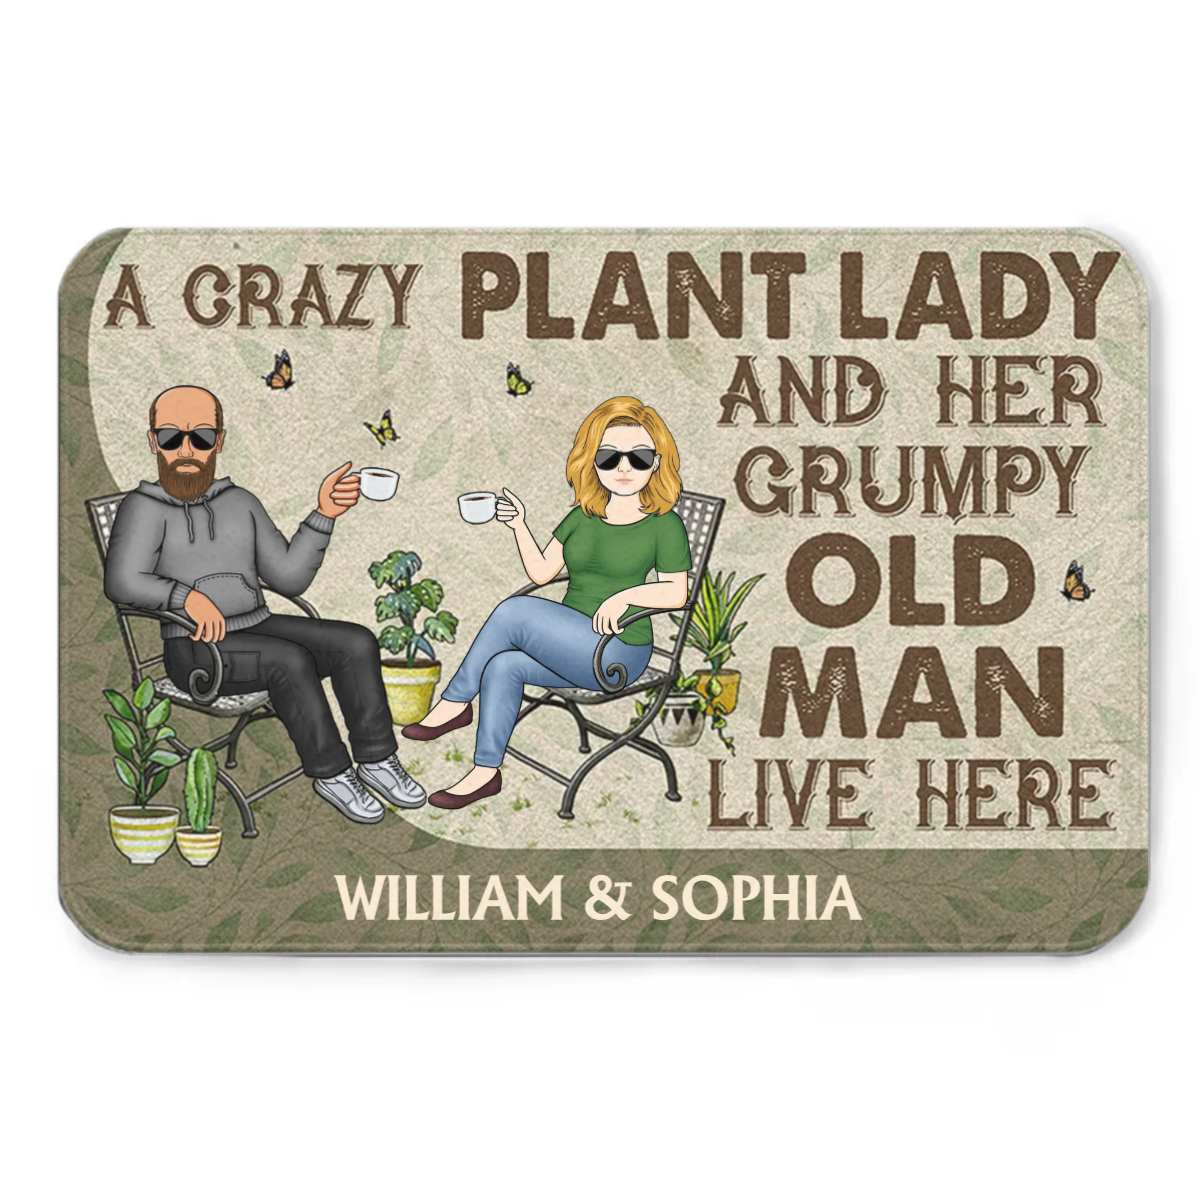 A Crazy Plant Lady And Her Grumpy Old Man Live Here - Gift For Gardening Lovers - Personalized Custom Doormat